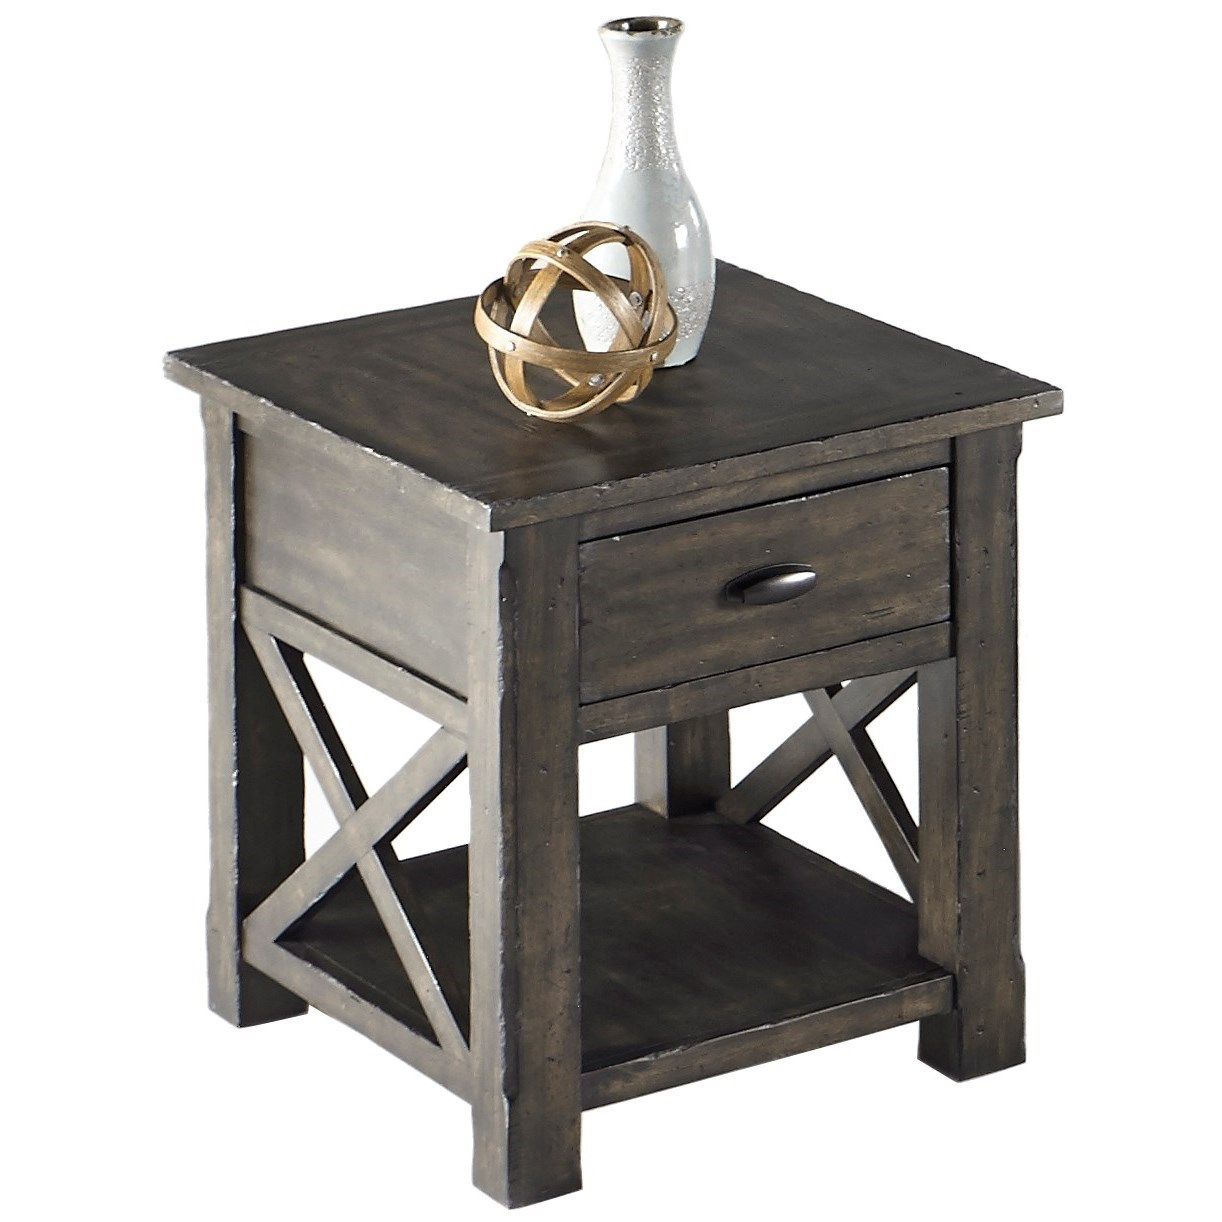 Progressive Furniture Crossroads Rustic Rectangular End Table In Gray In Rustic Gray End Tables (View 9 of 15)